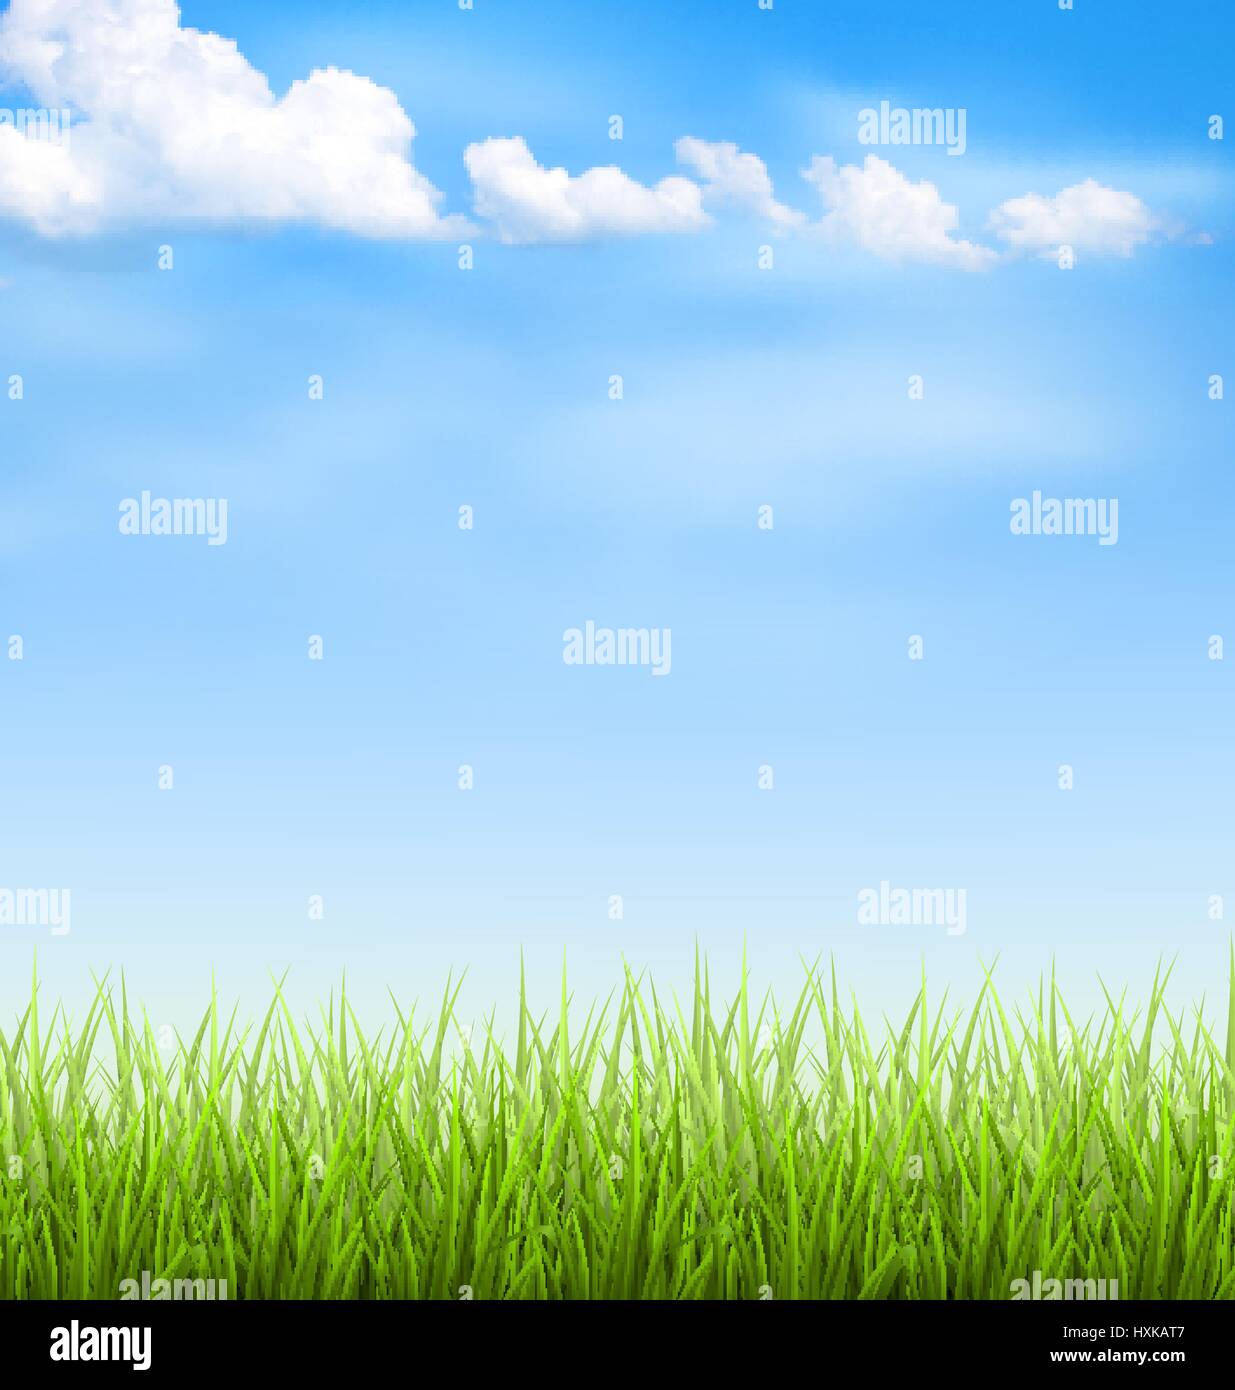 Grass lawn with clouds on blue sky Stock Vector